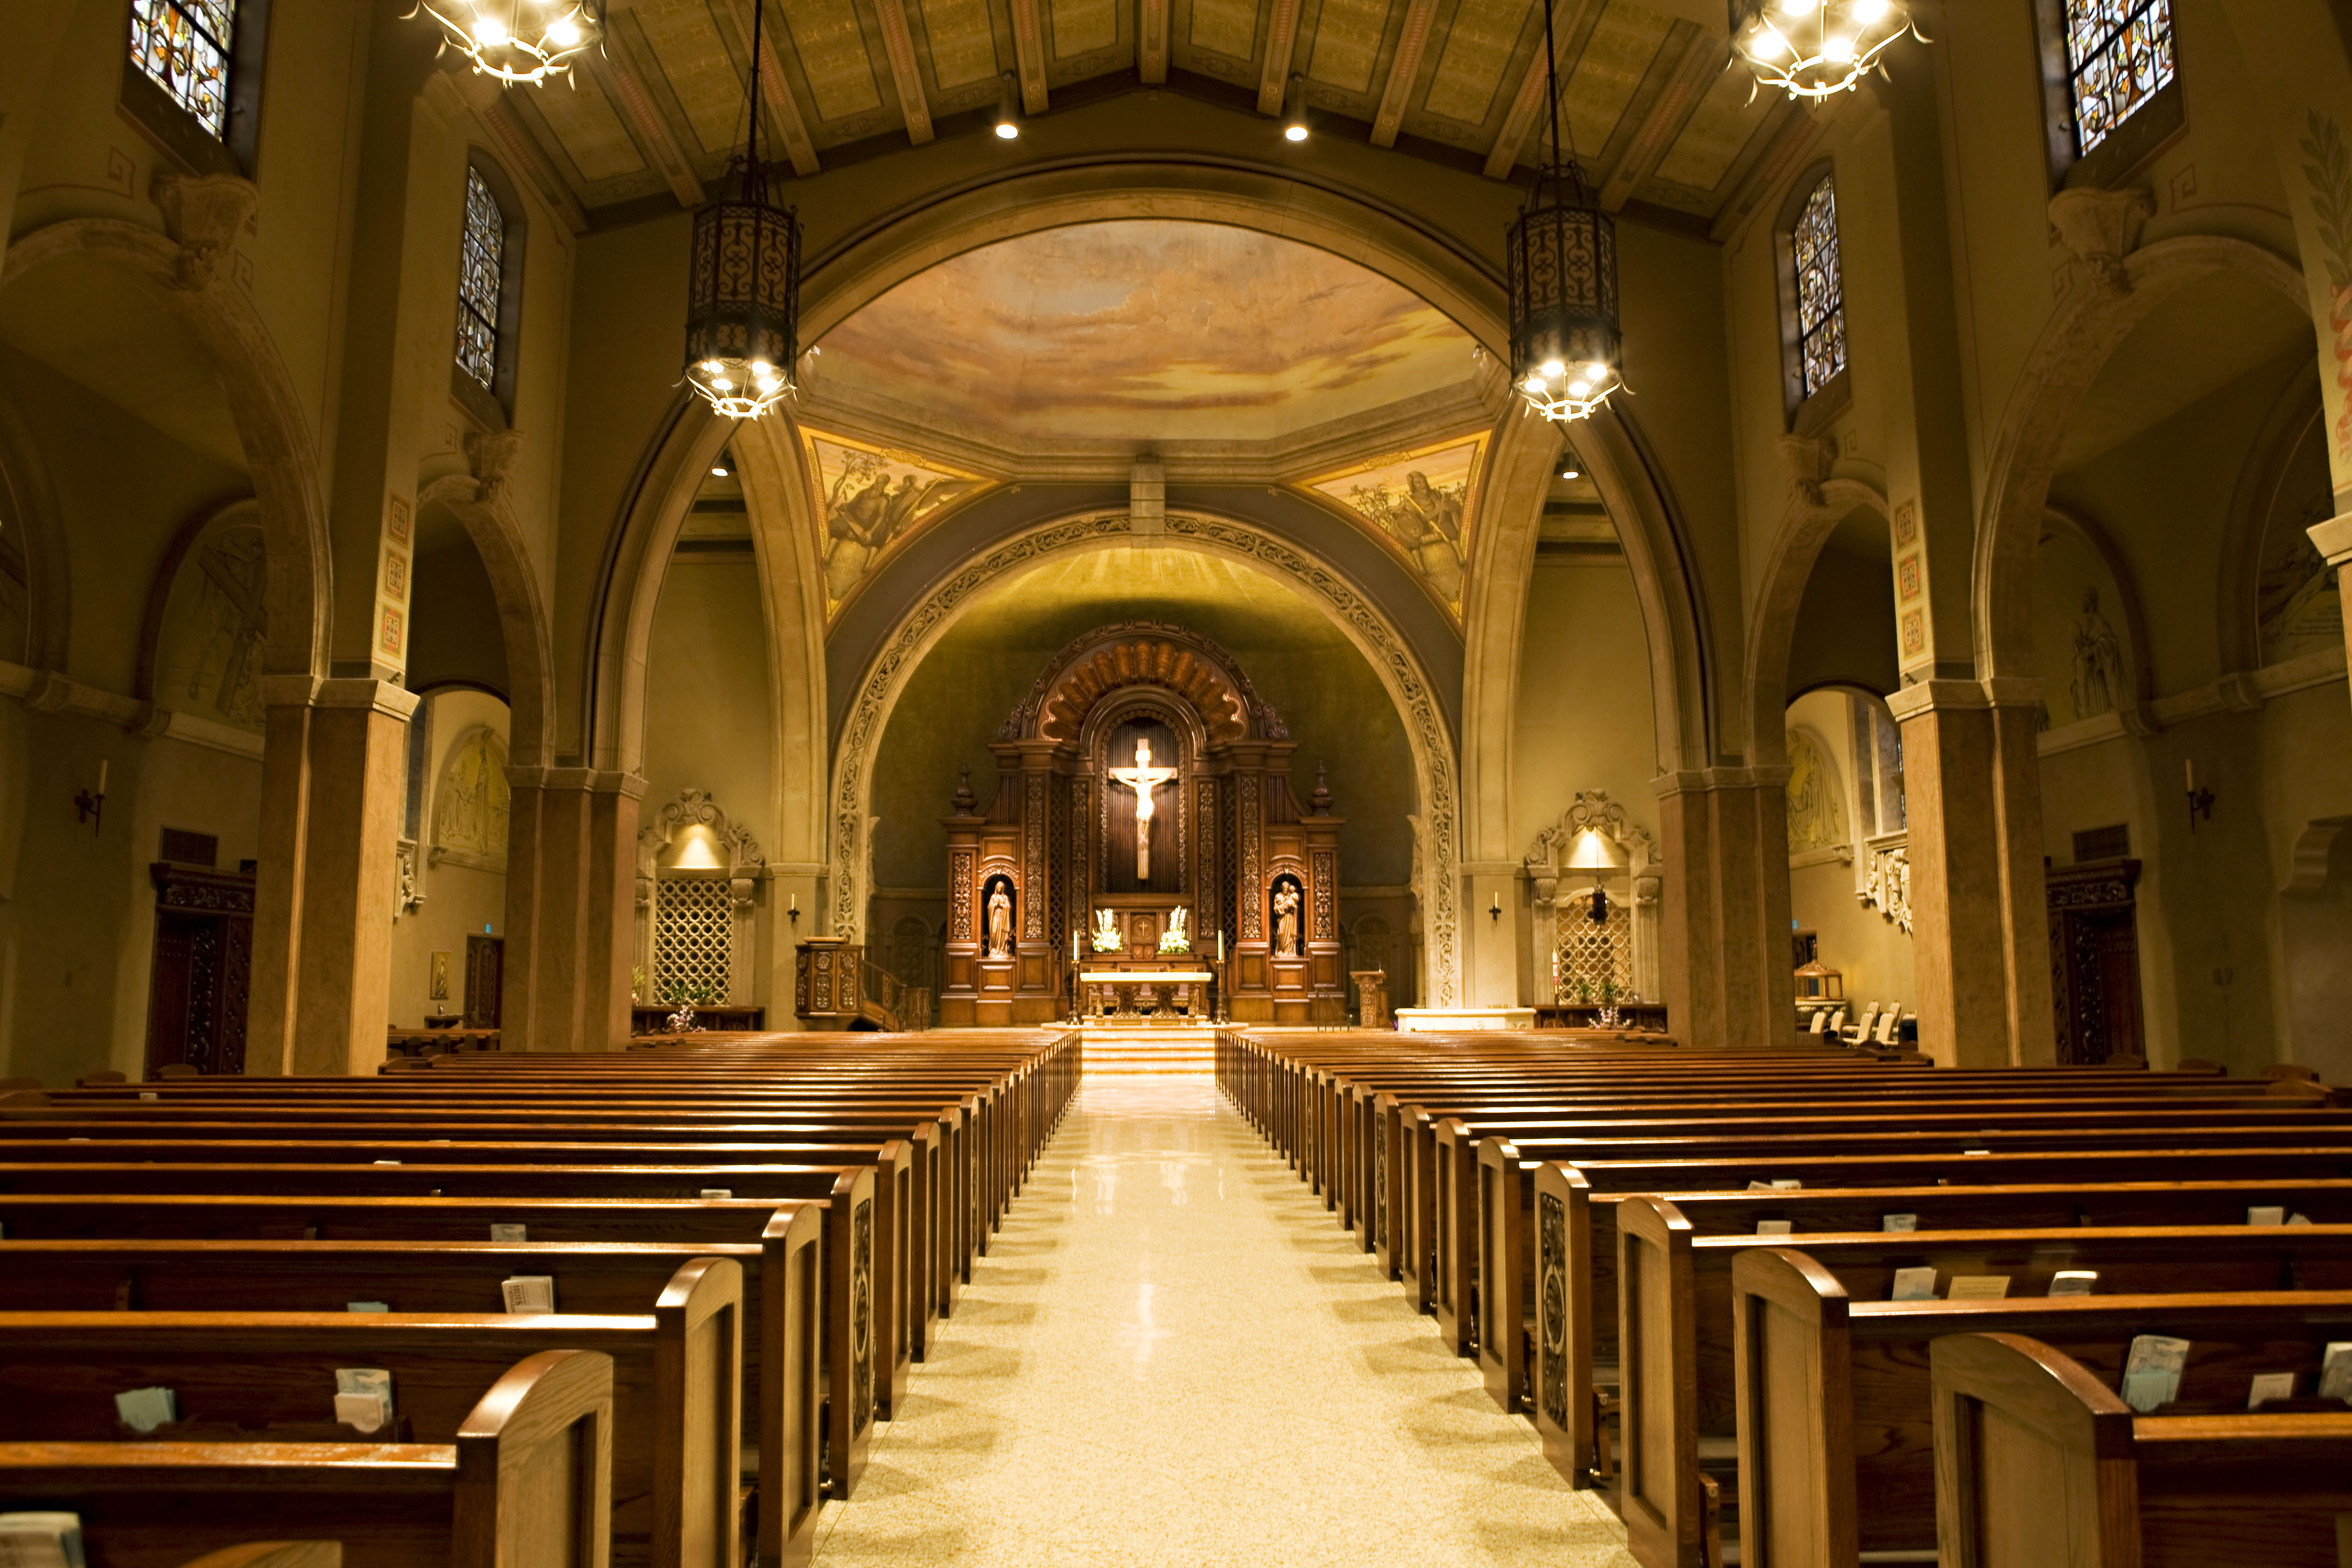 St. Charles after the renovation.